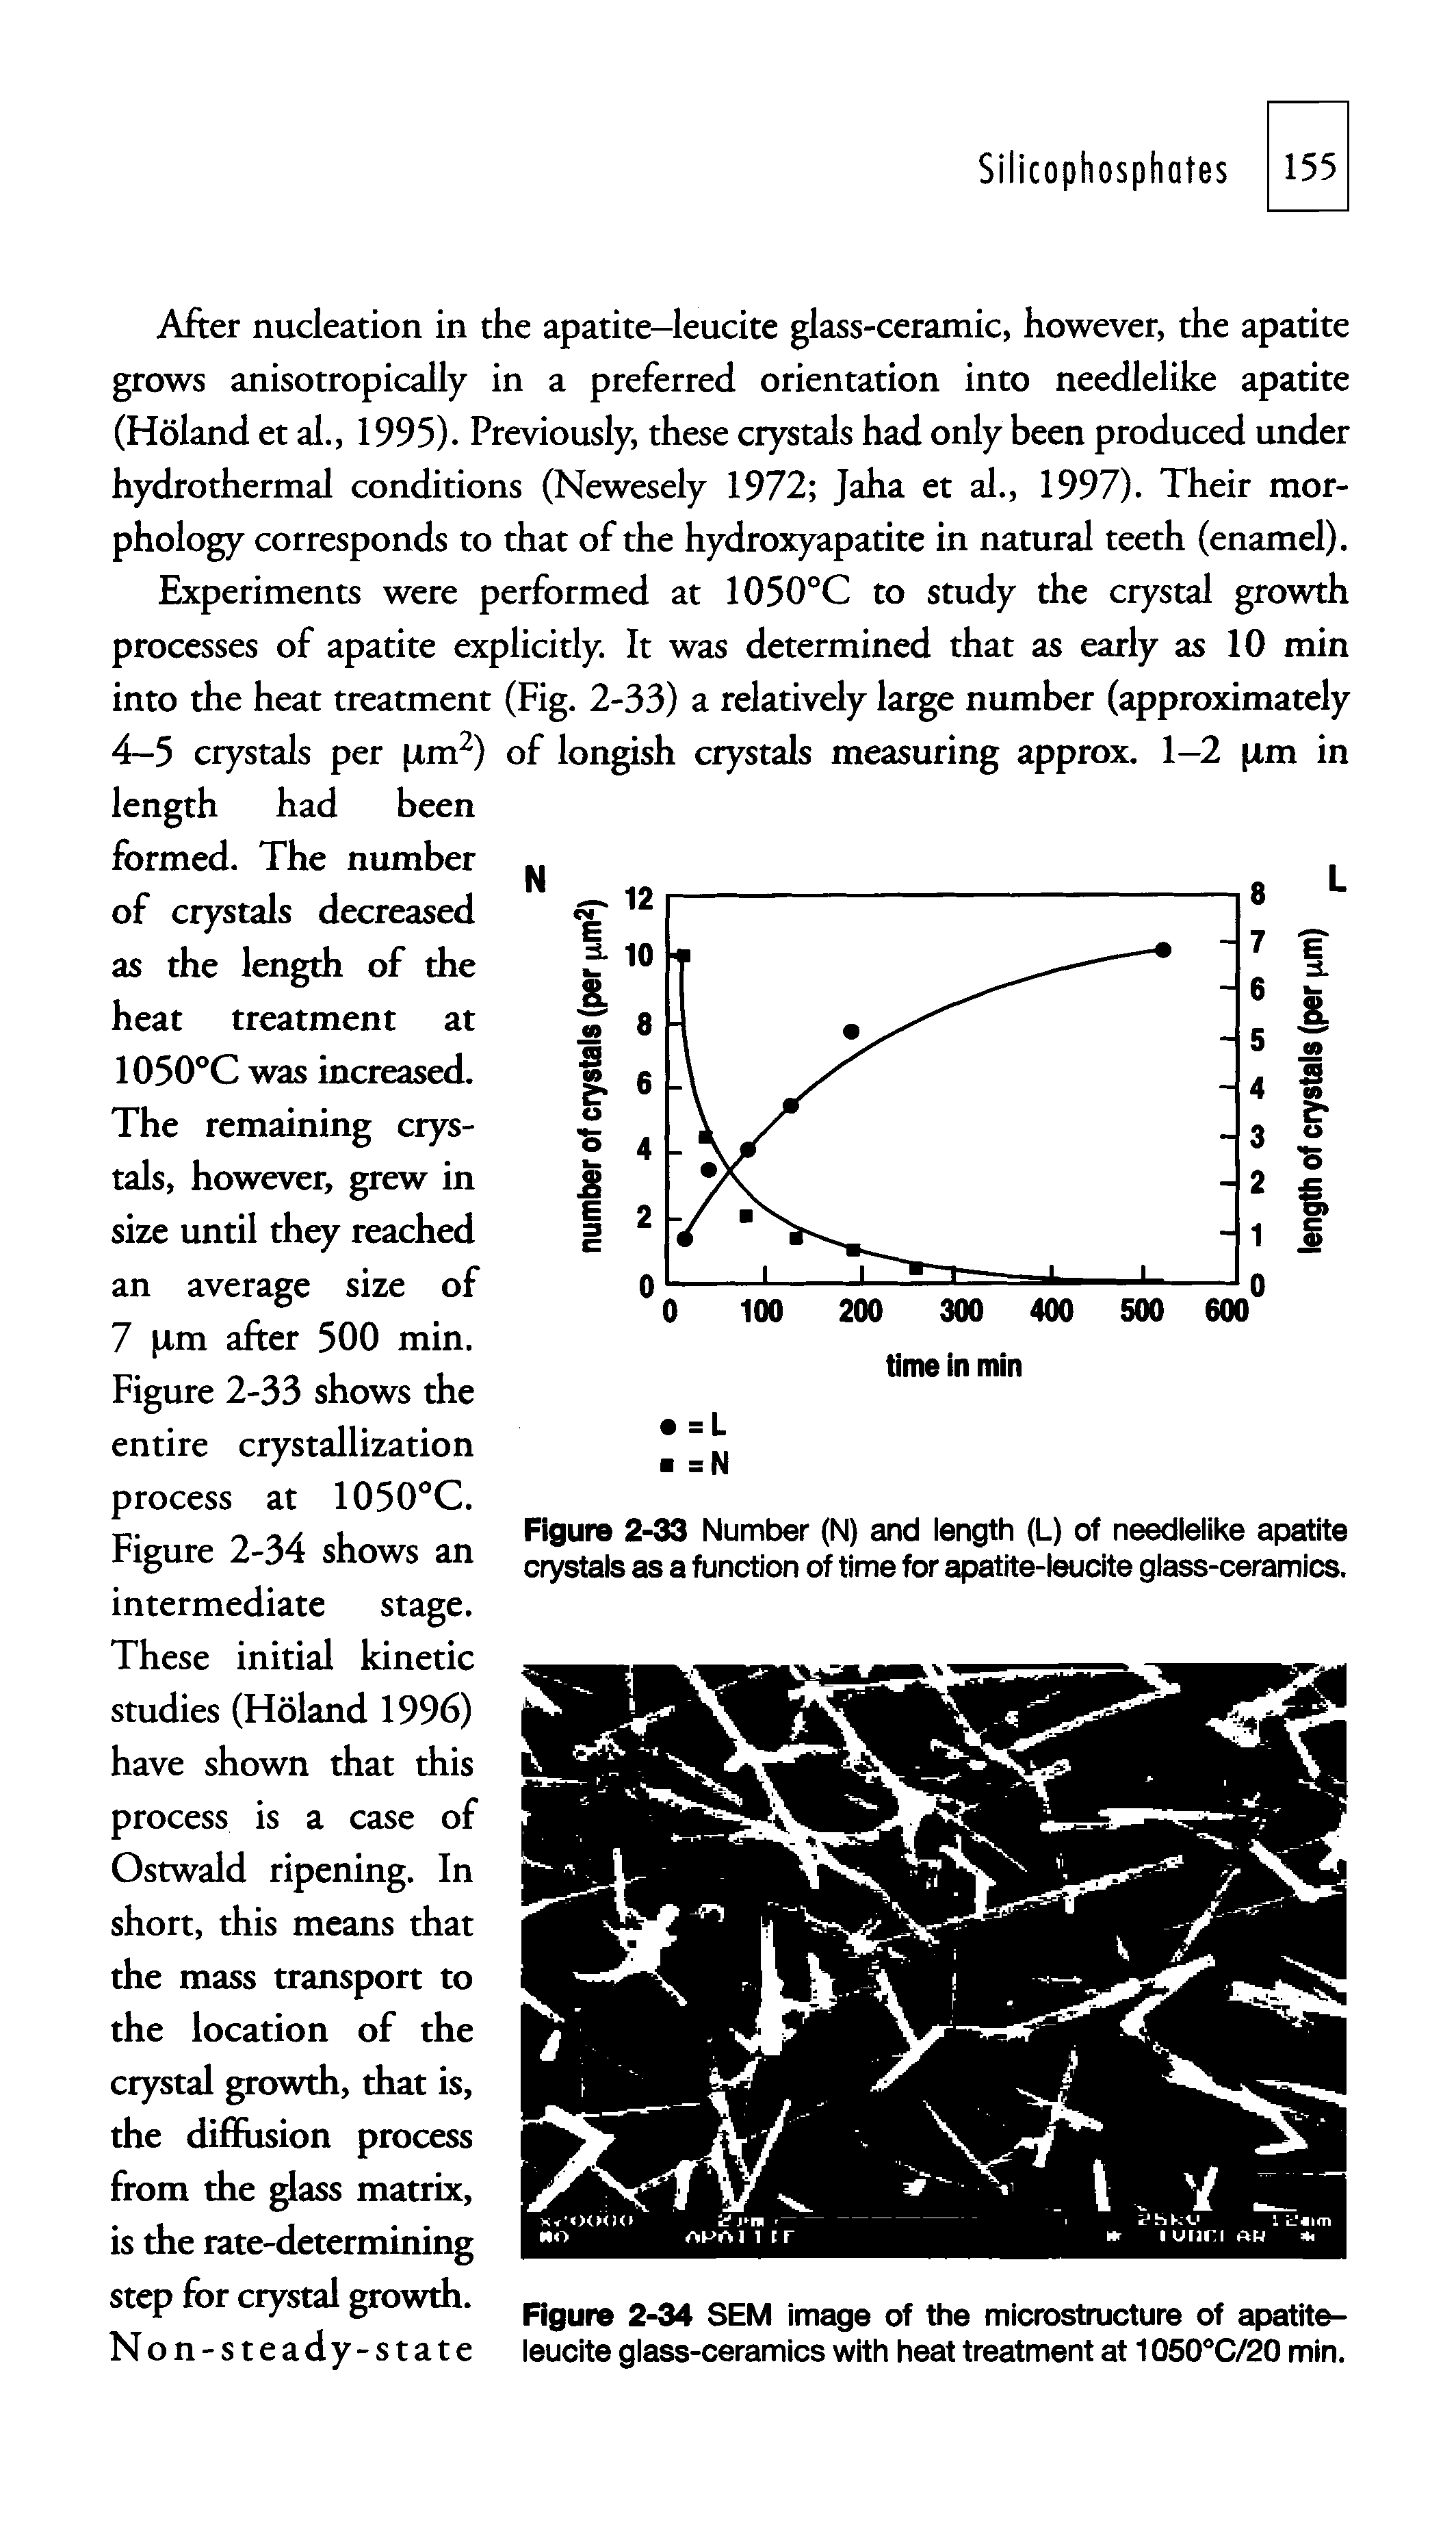 Figure 2-33 Number (N) and length (L) of needlelike apatite crystals as a function of time for apatite-leucite glass-ceramics.